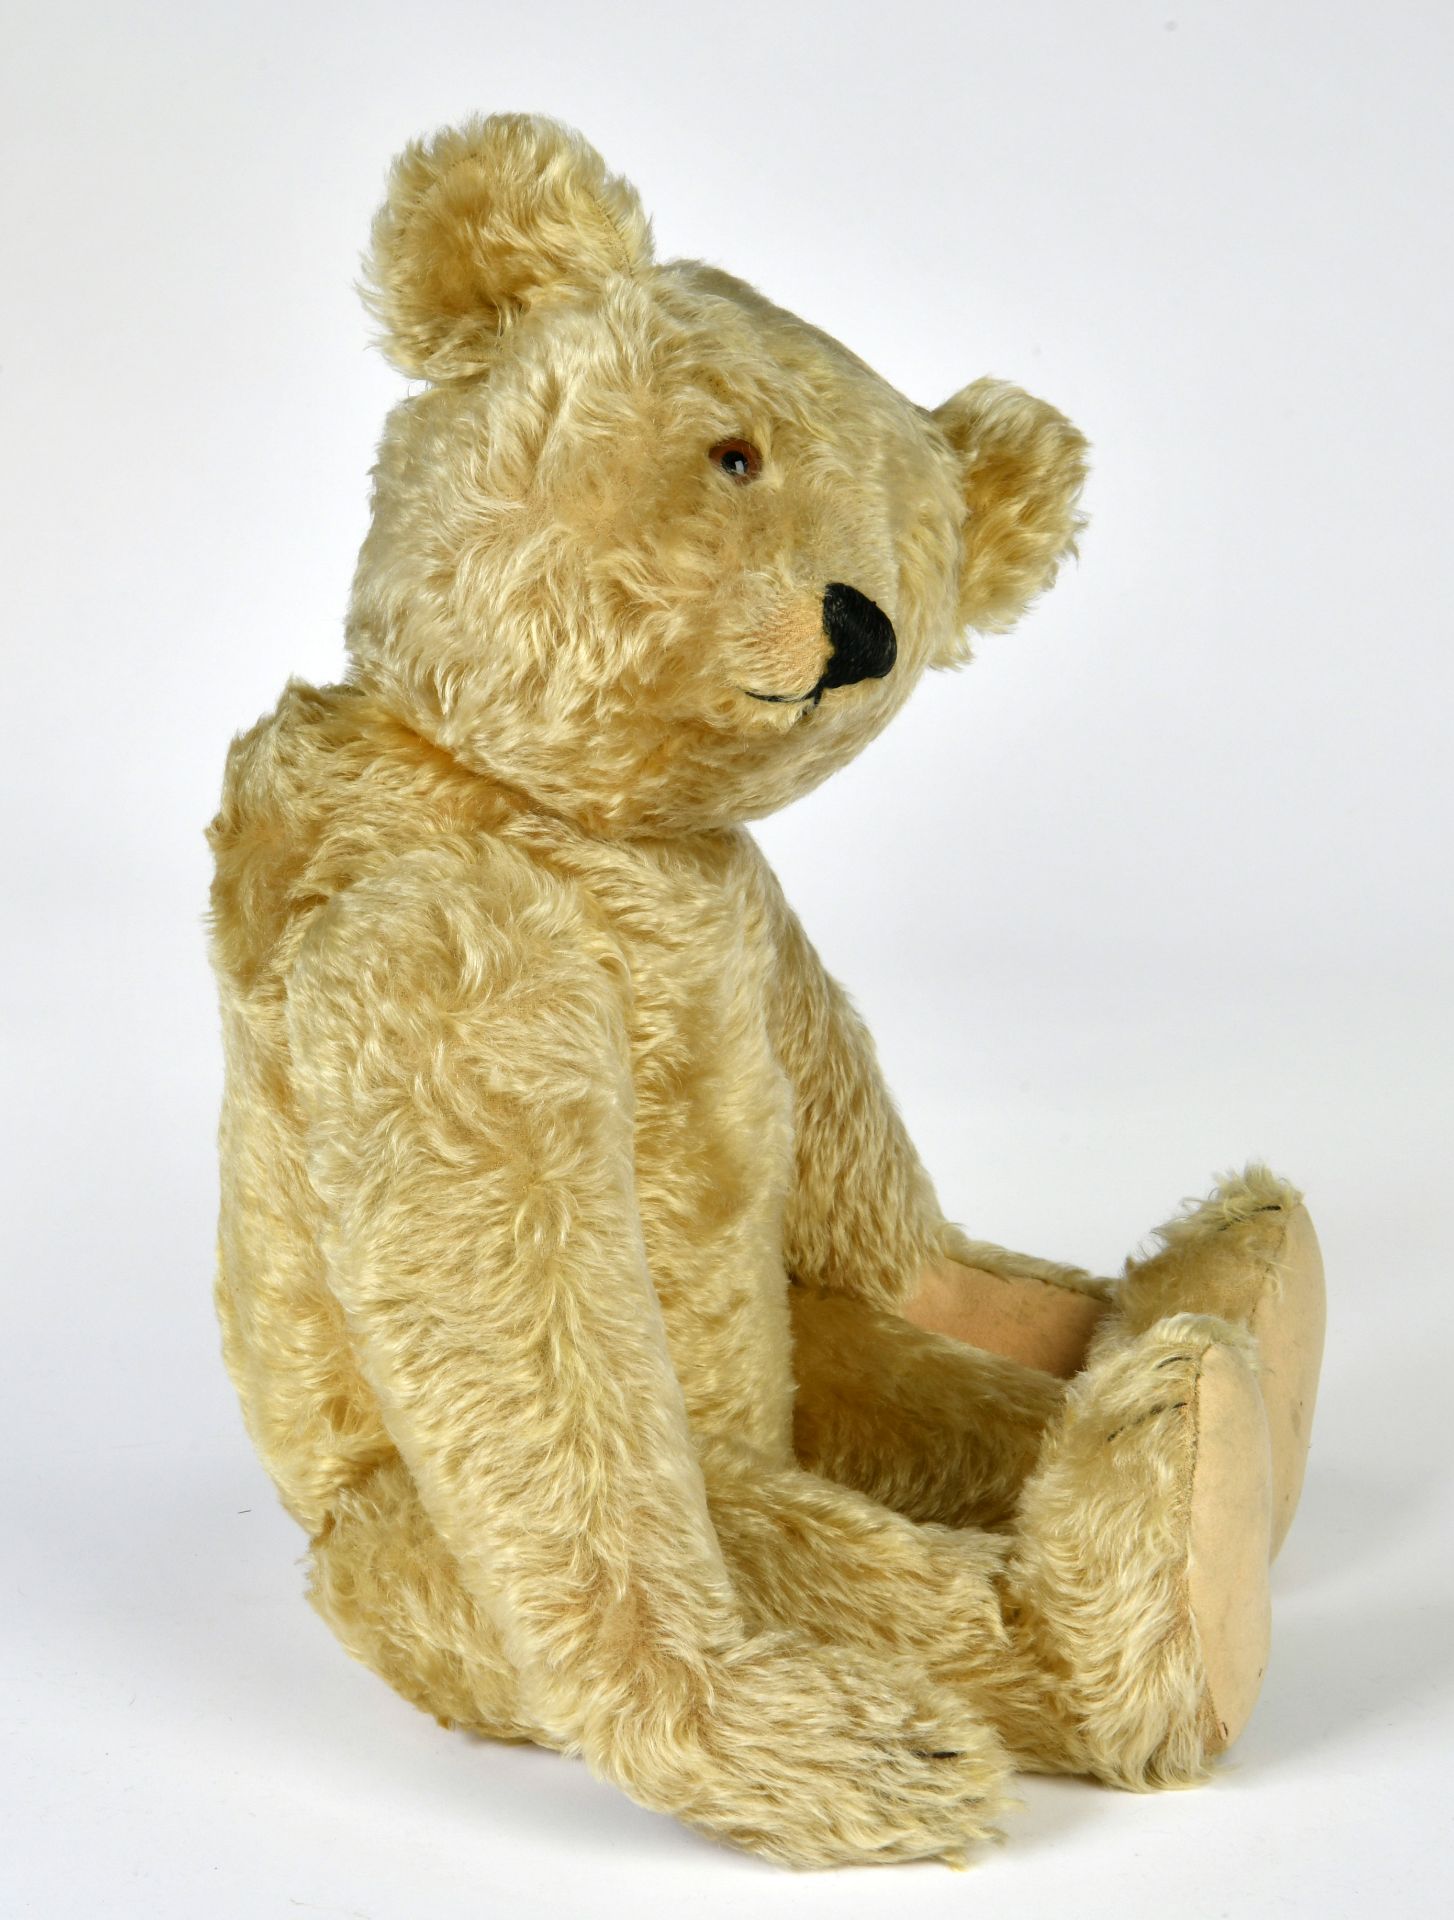 Steiff, bear, 60 cm, ca. 1920s, yellow, with buttom, expressive, very good condition - Image 3 of 3